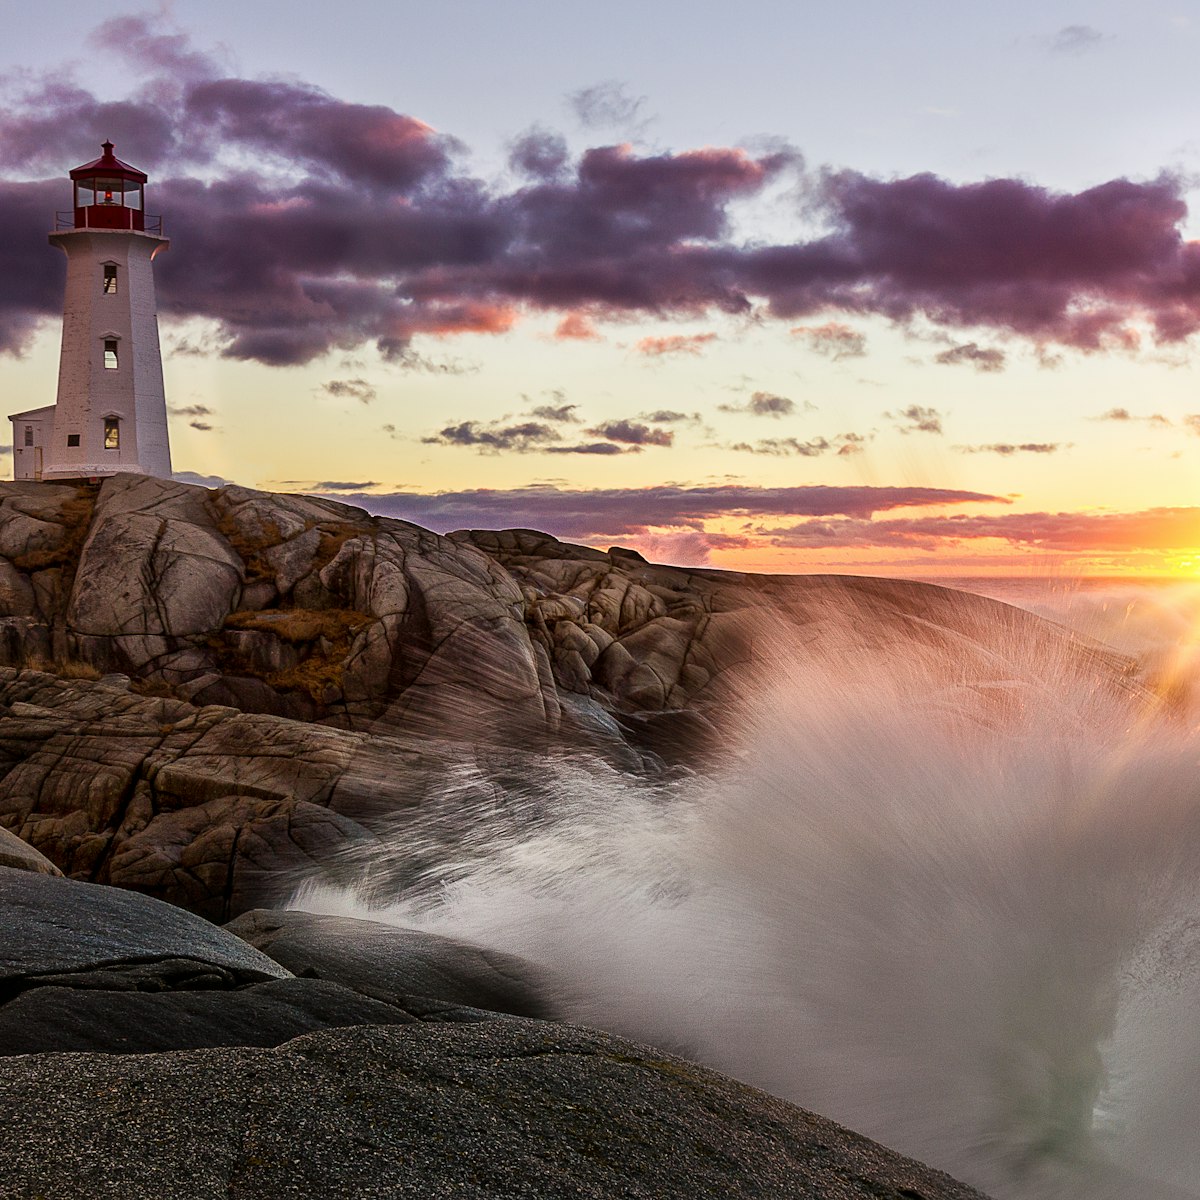 Sunset at Peggys Cove after a violent wind storm the previous day